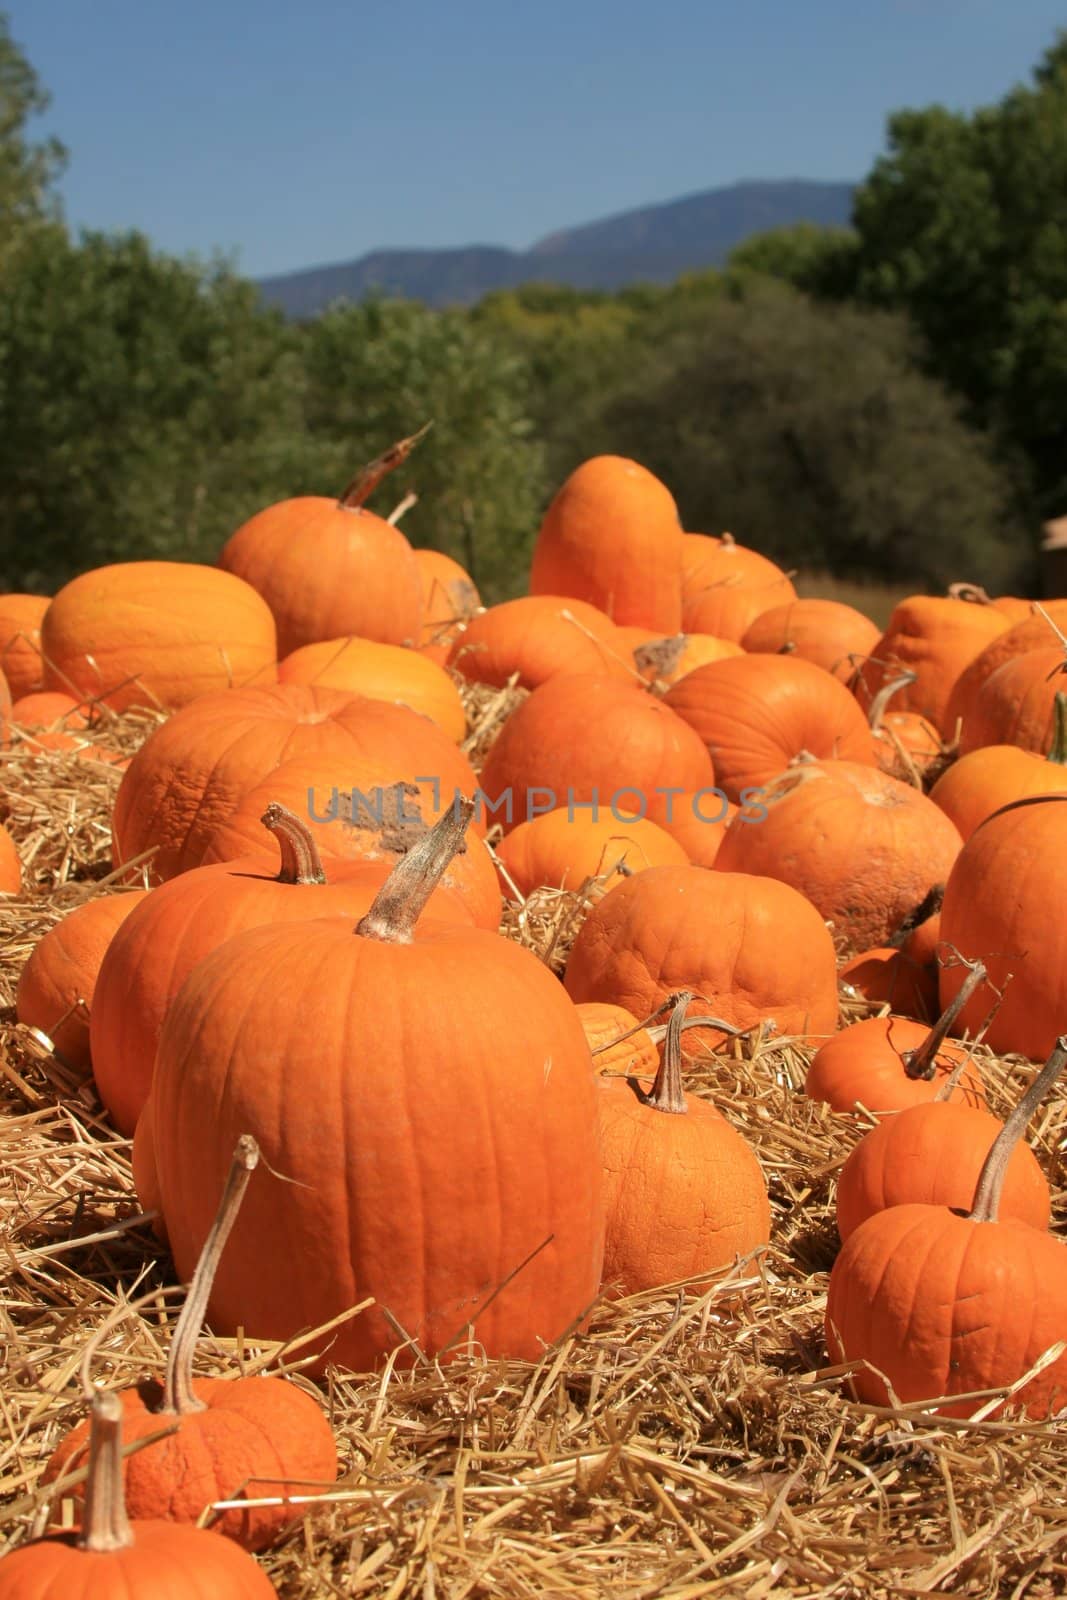 Pumpkins (Curcurbita moschata) picked from the vines and placed in straw to cure before being stored for the winter.